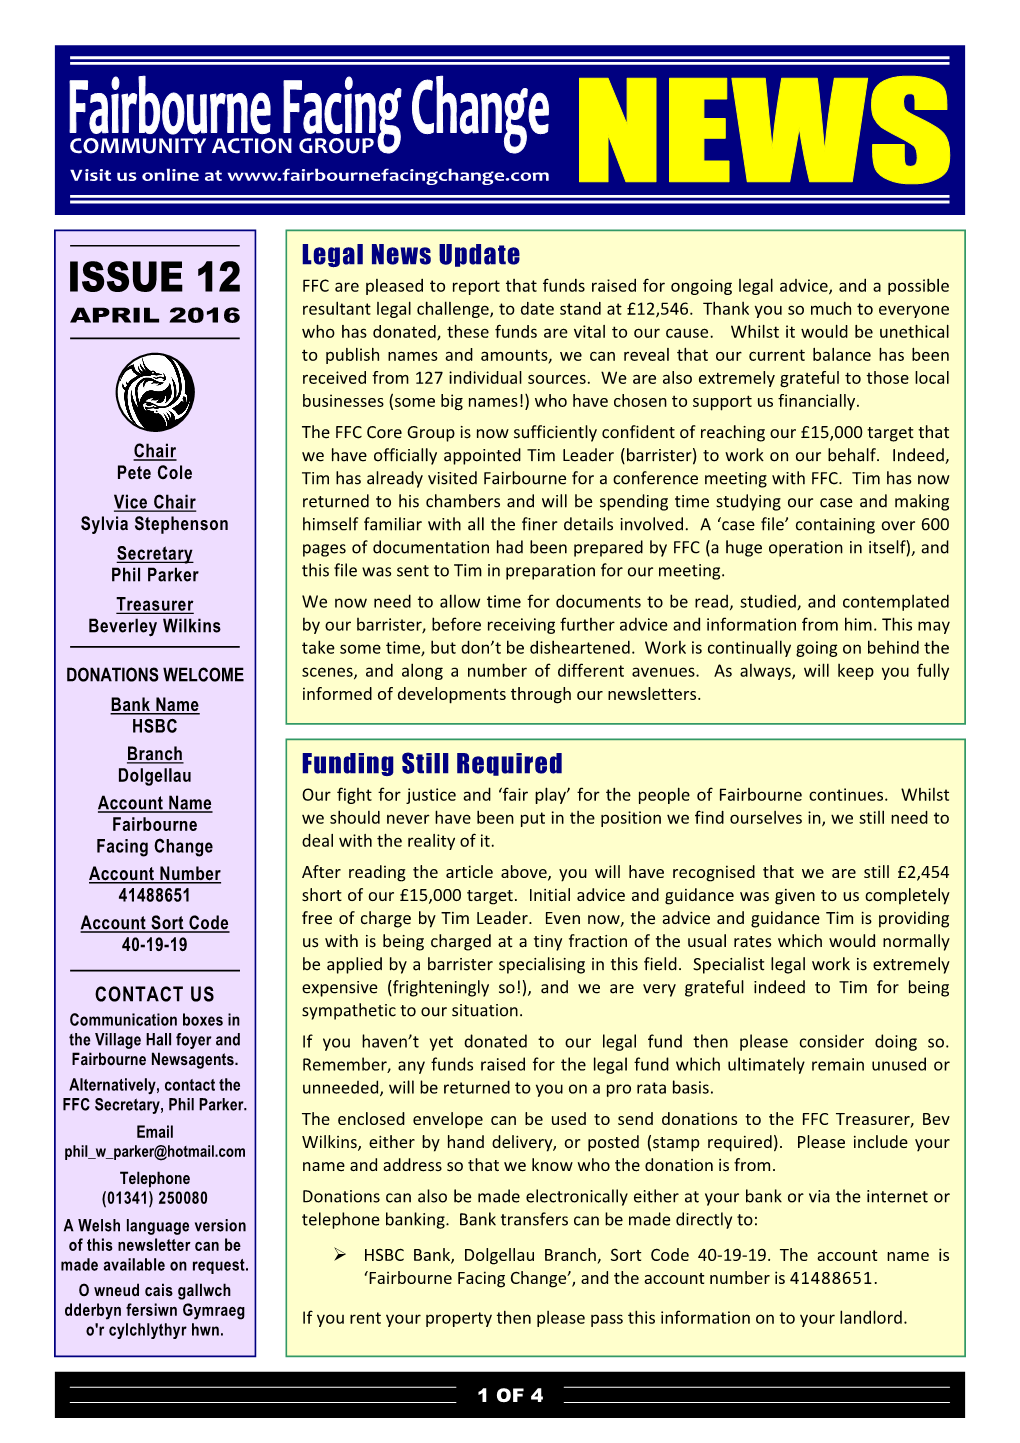 Legal News Update Funding Still Required